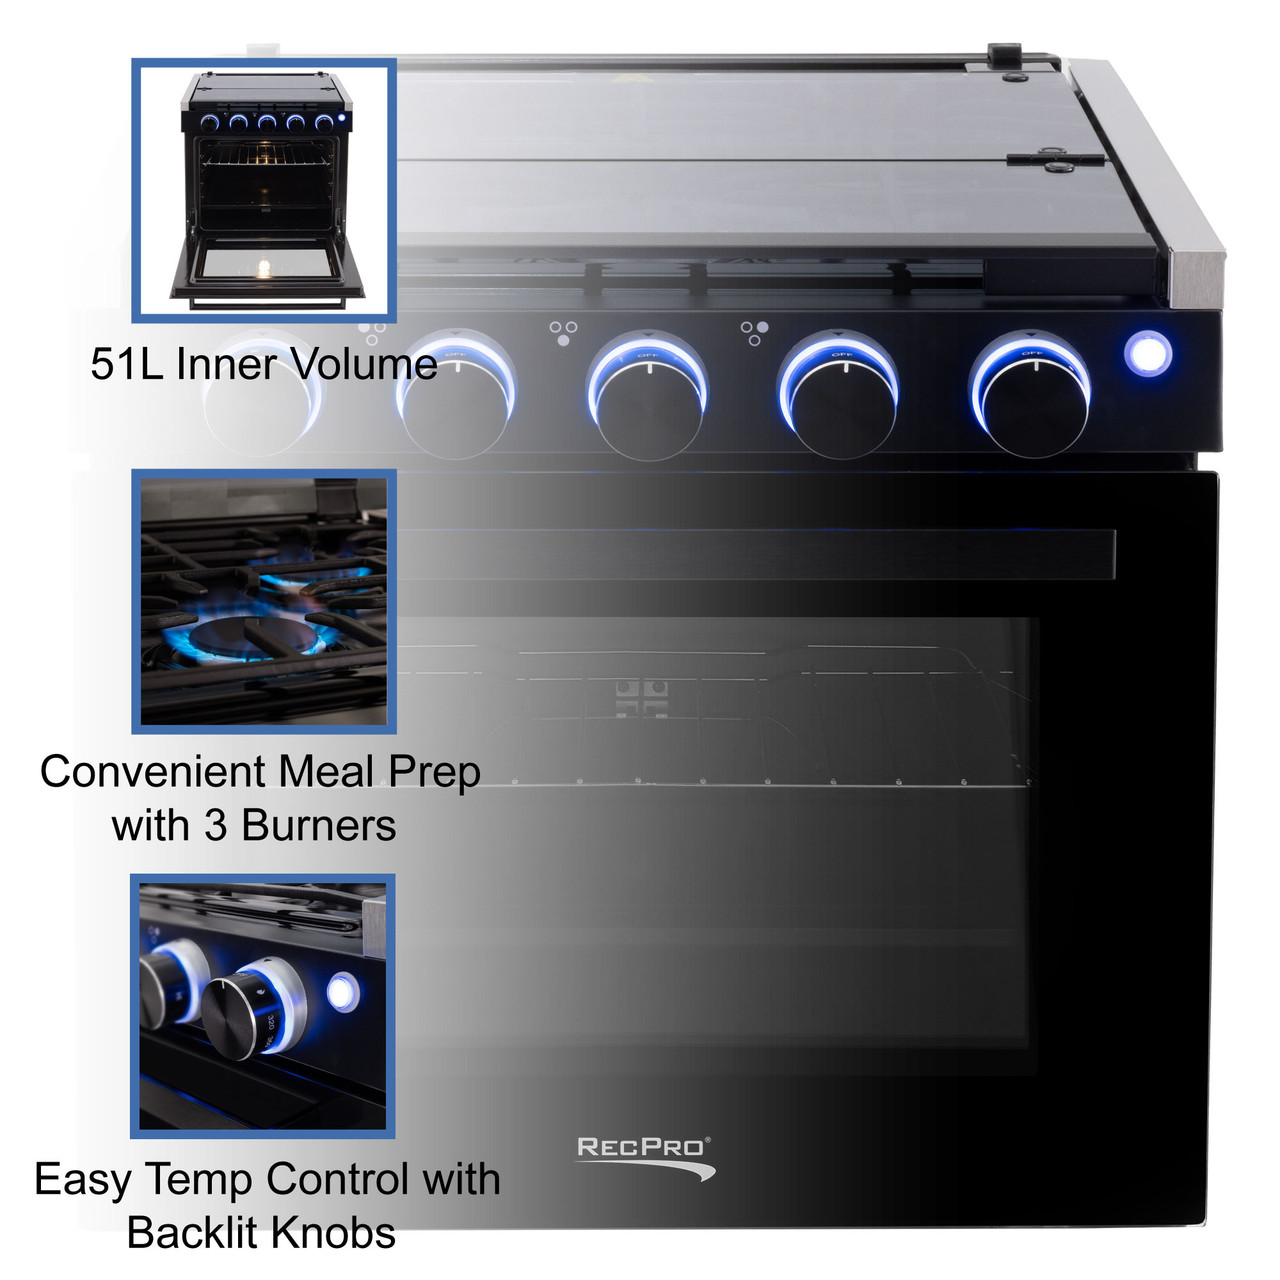 RecPro RV Stove GAS Range 21 Tall Optional Vented Range Hood Black or Silver Color options (Silver, No Vented Range Hood)